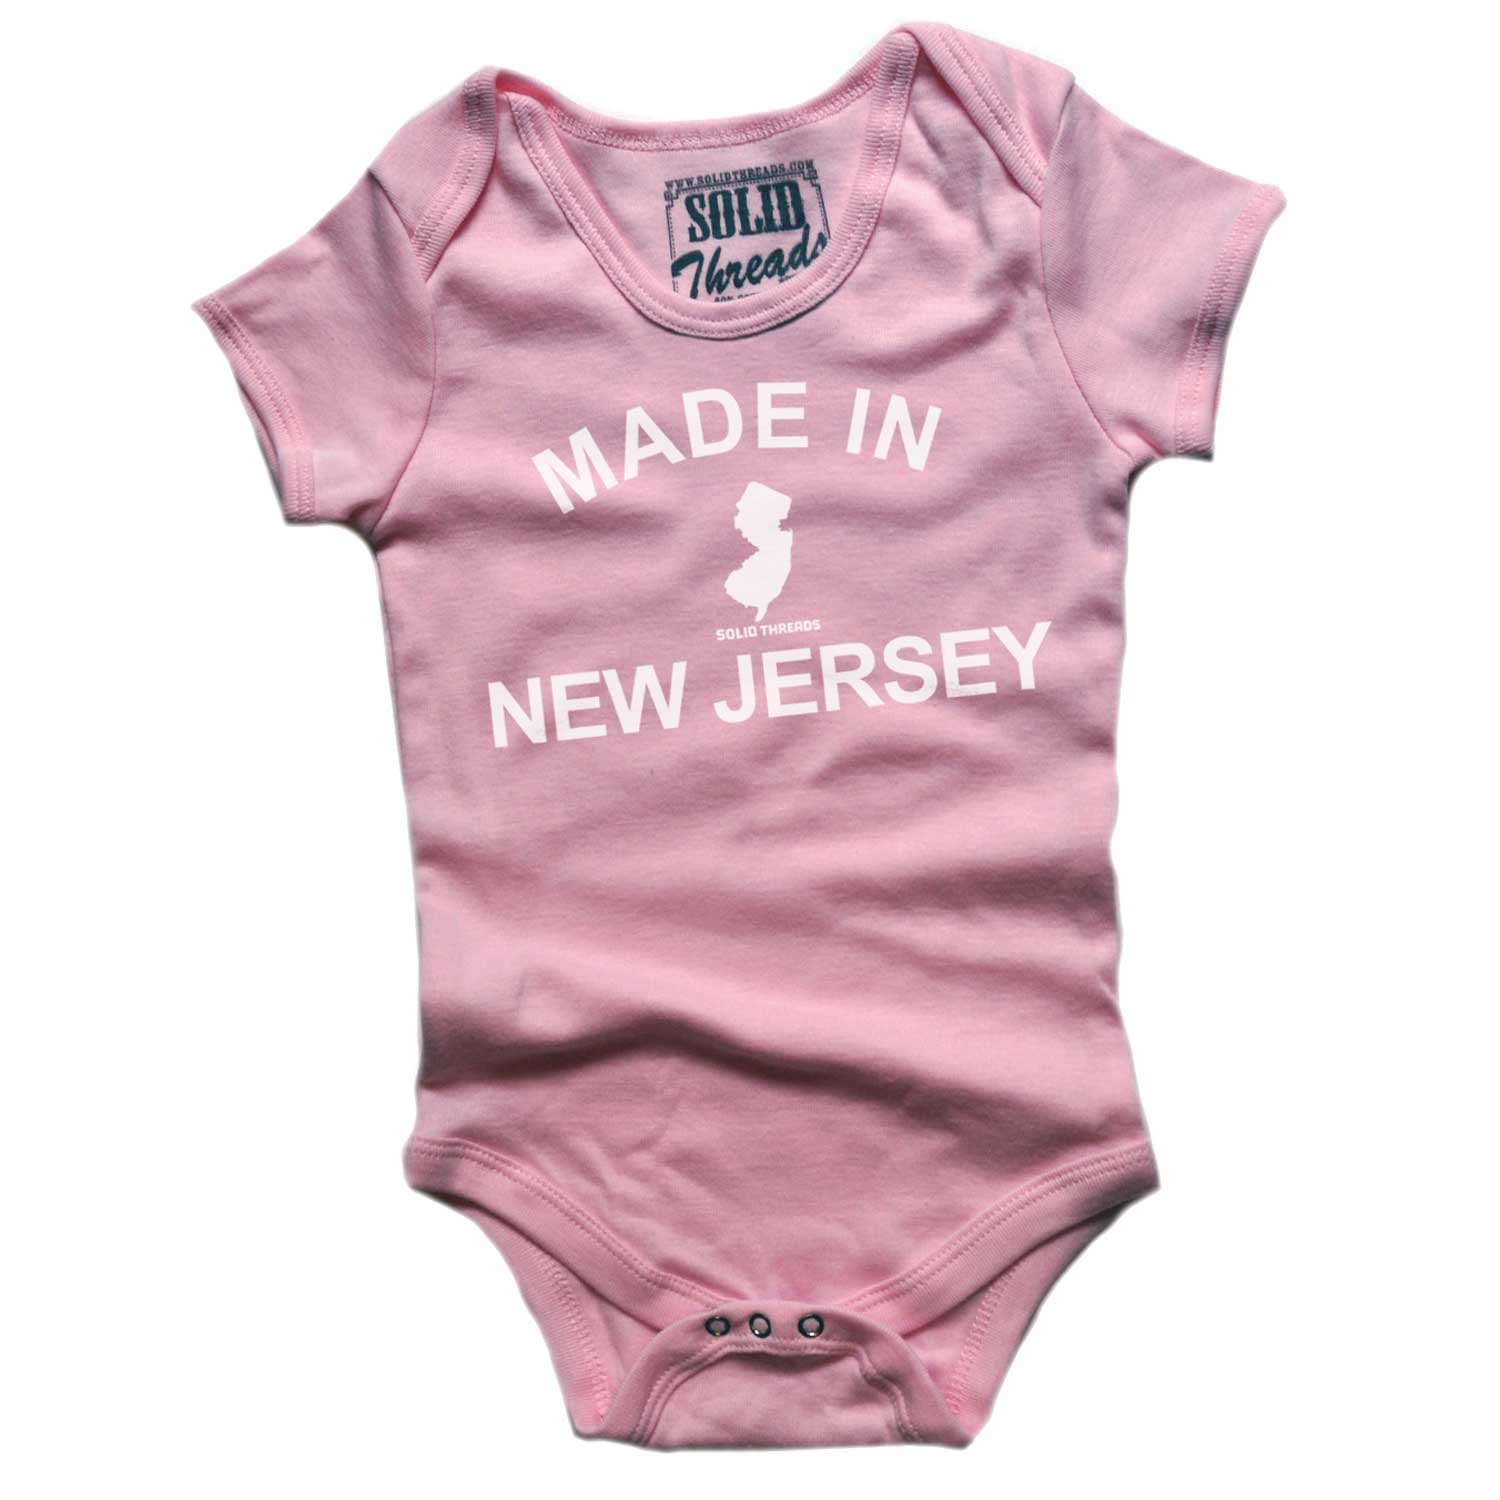 Baby Made In New Jersey Cool Graphic One Piece | Retro Garden State Navy Romper | Solid Threads